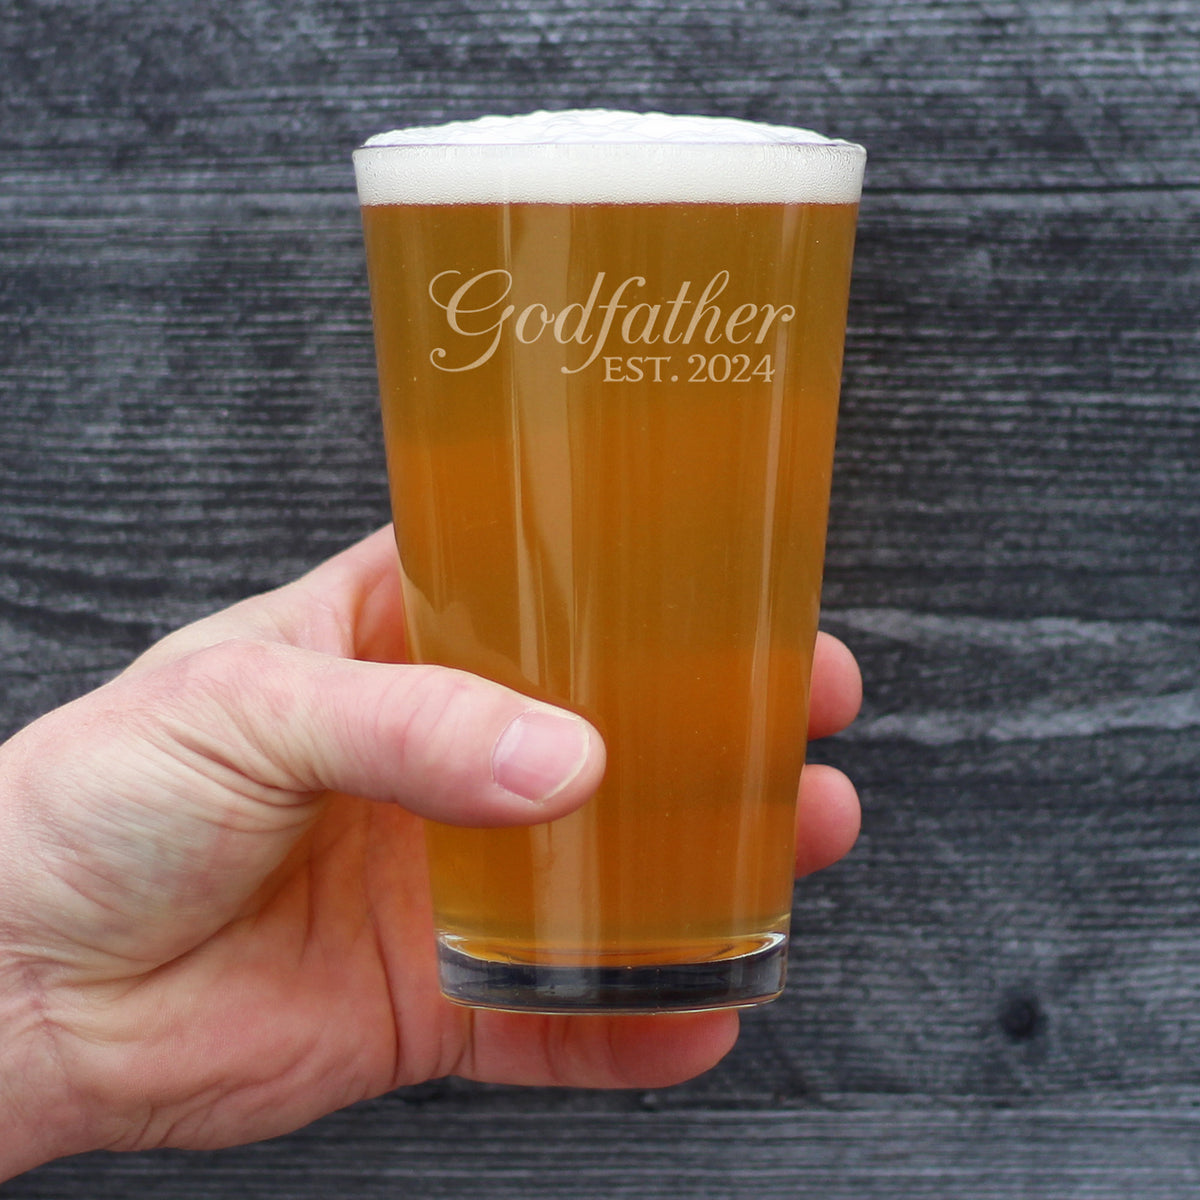 Godfather Est 2024 - New Godfather Pint Glass Proposal Gift for First Time Godparents - Decorative 16 Oz Glasses